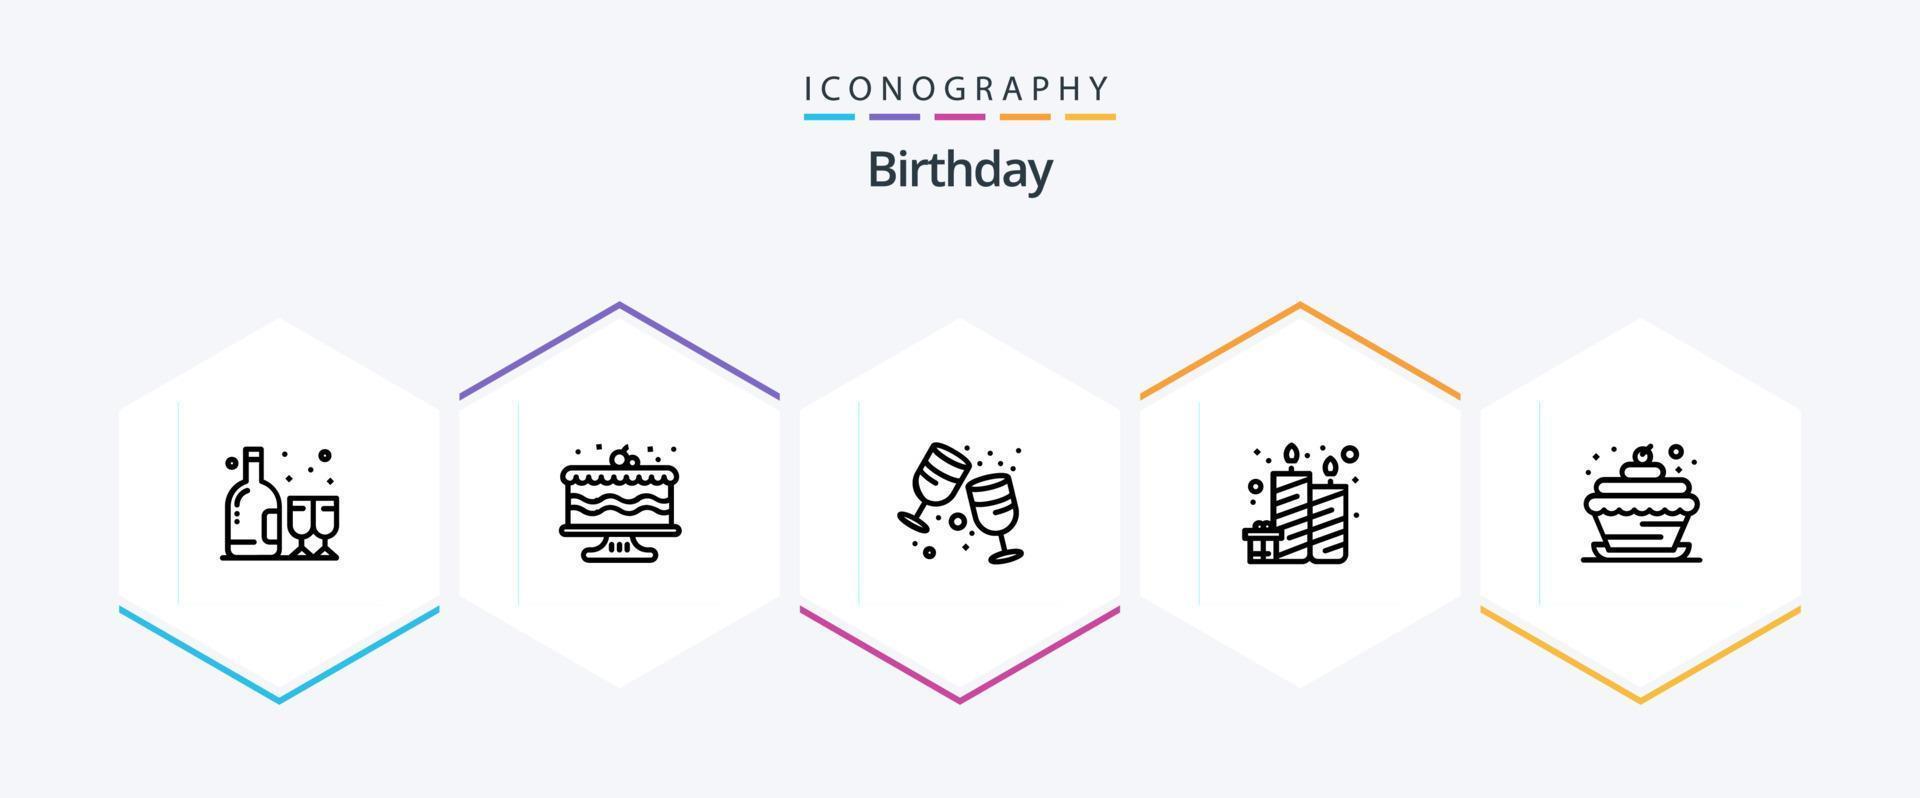 Birthday 25 Line icon pack including birthday. party. birthday. candles. birthday vector